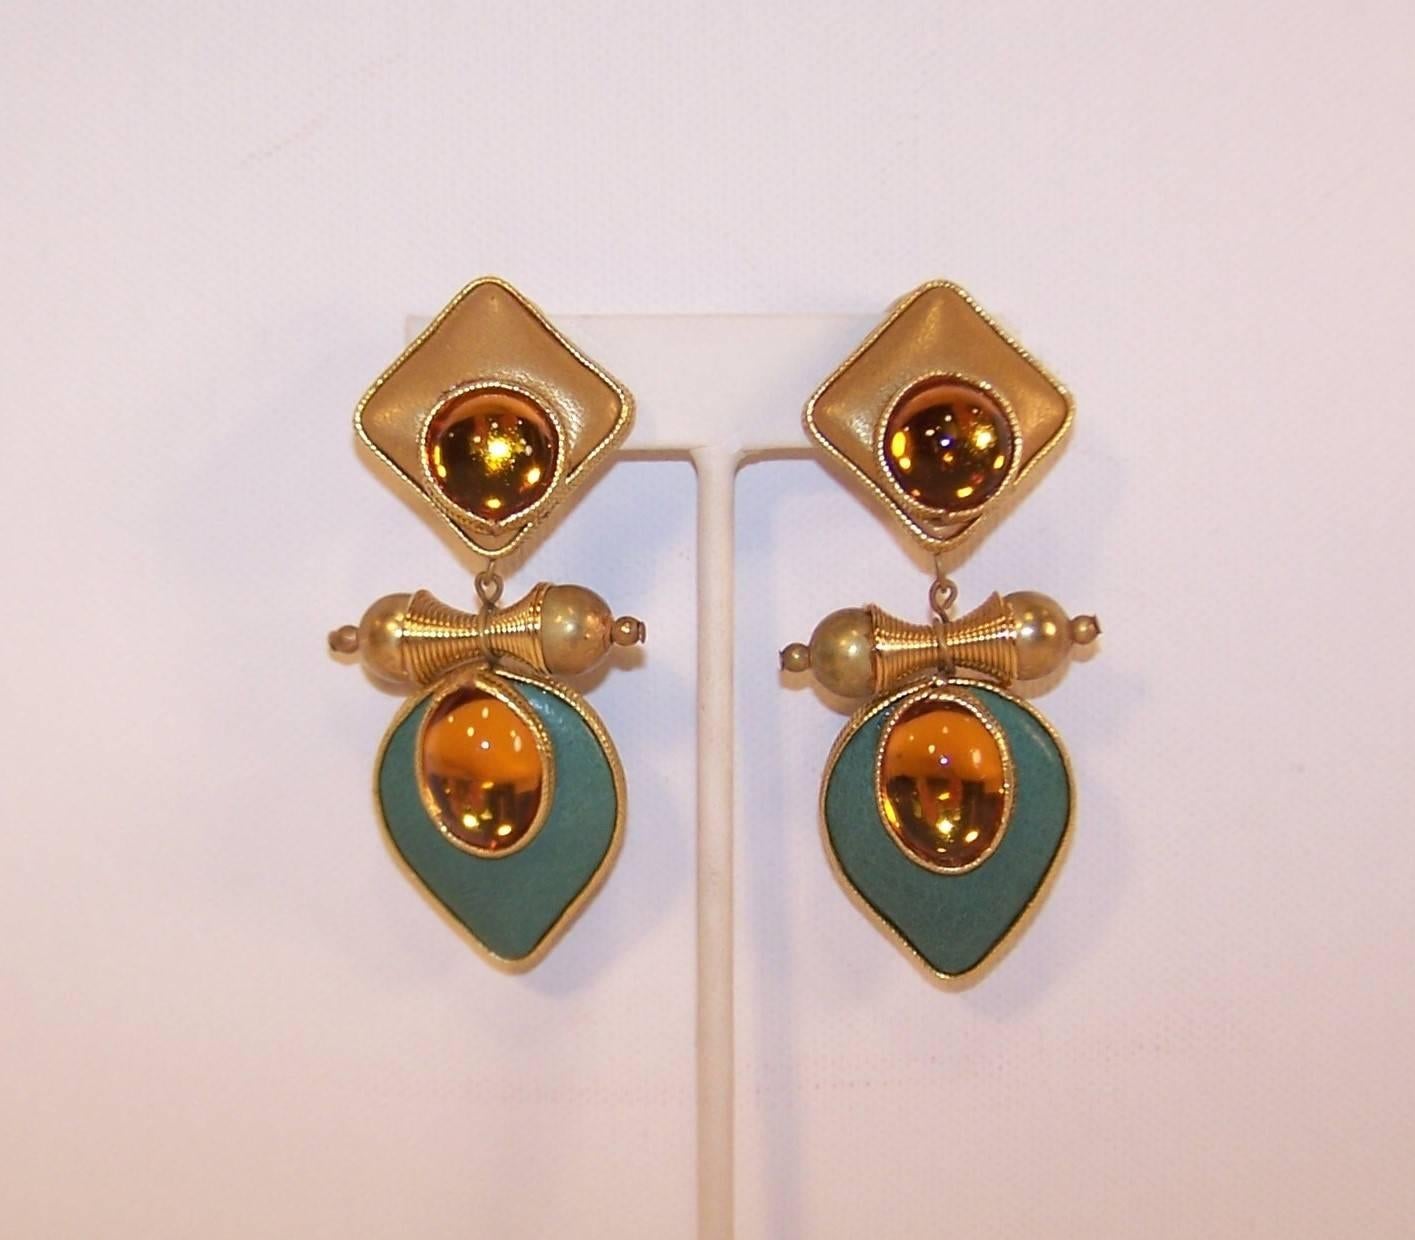 These 1980's drop dangle clip on earrings are a tactile and visual delight.  The base and drop dangle are covered in gold and light teal leather and framed in gold braid.  Each piece features a cabochon style faux amber stone also framed in braid. 